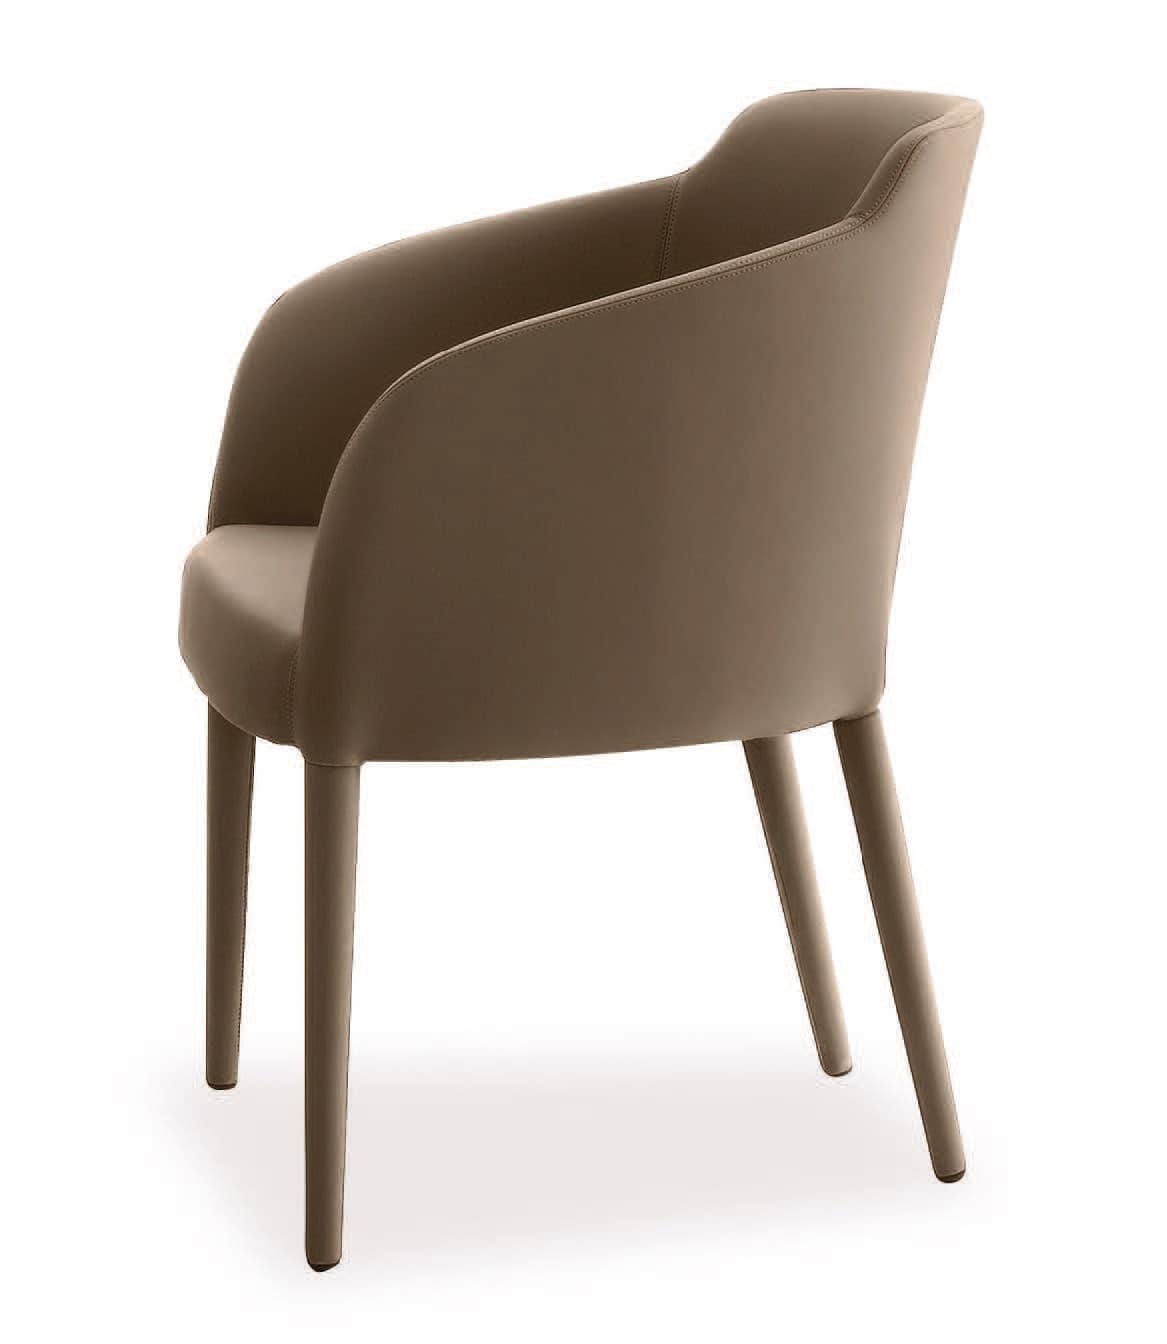 PL 5000, Armchair with wooden legs, in various colors